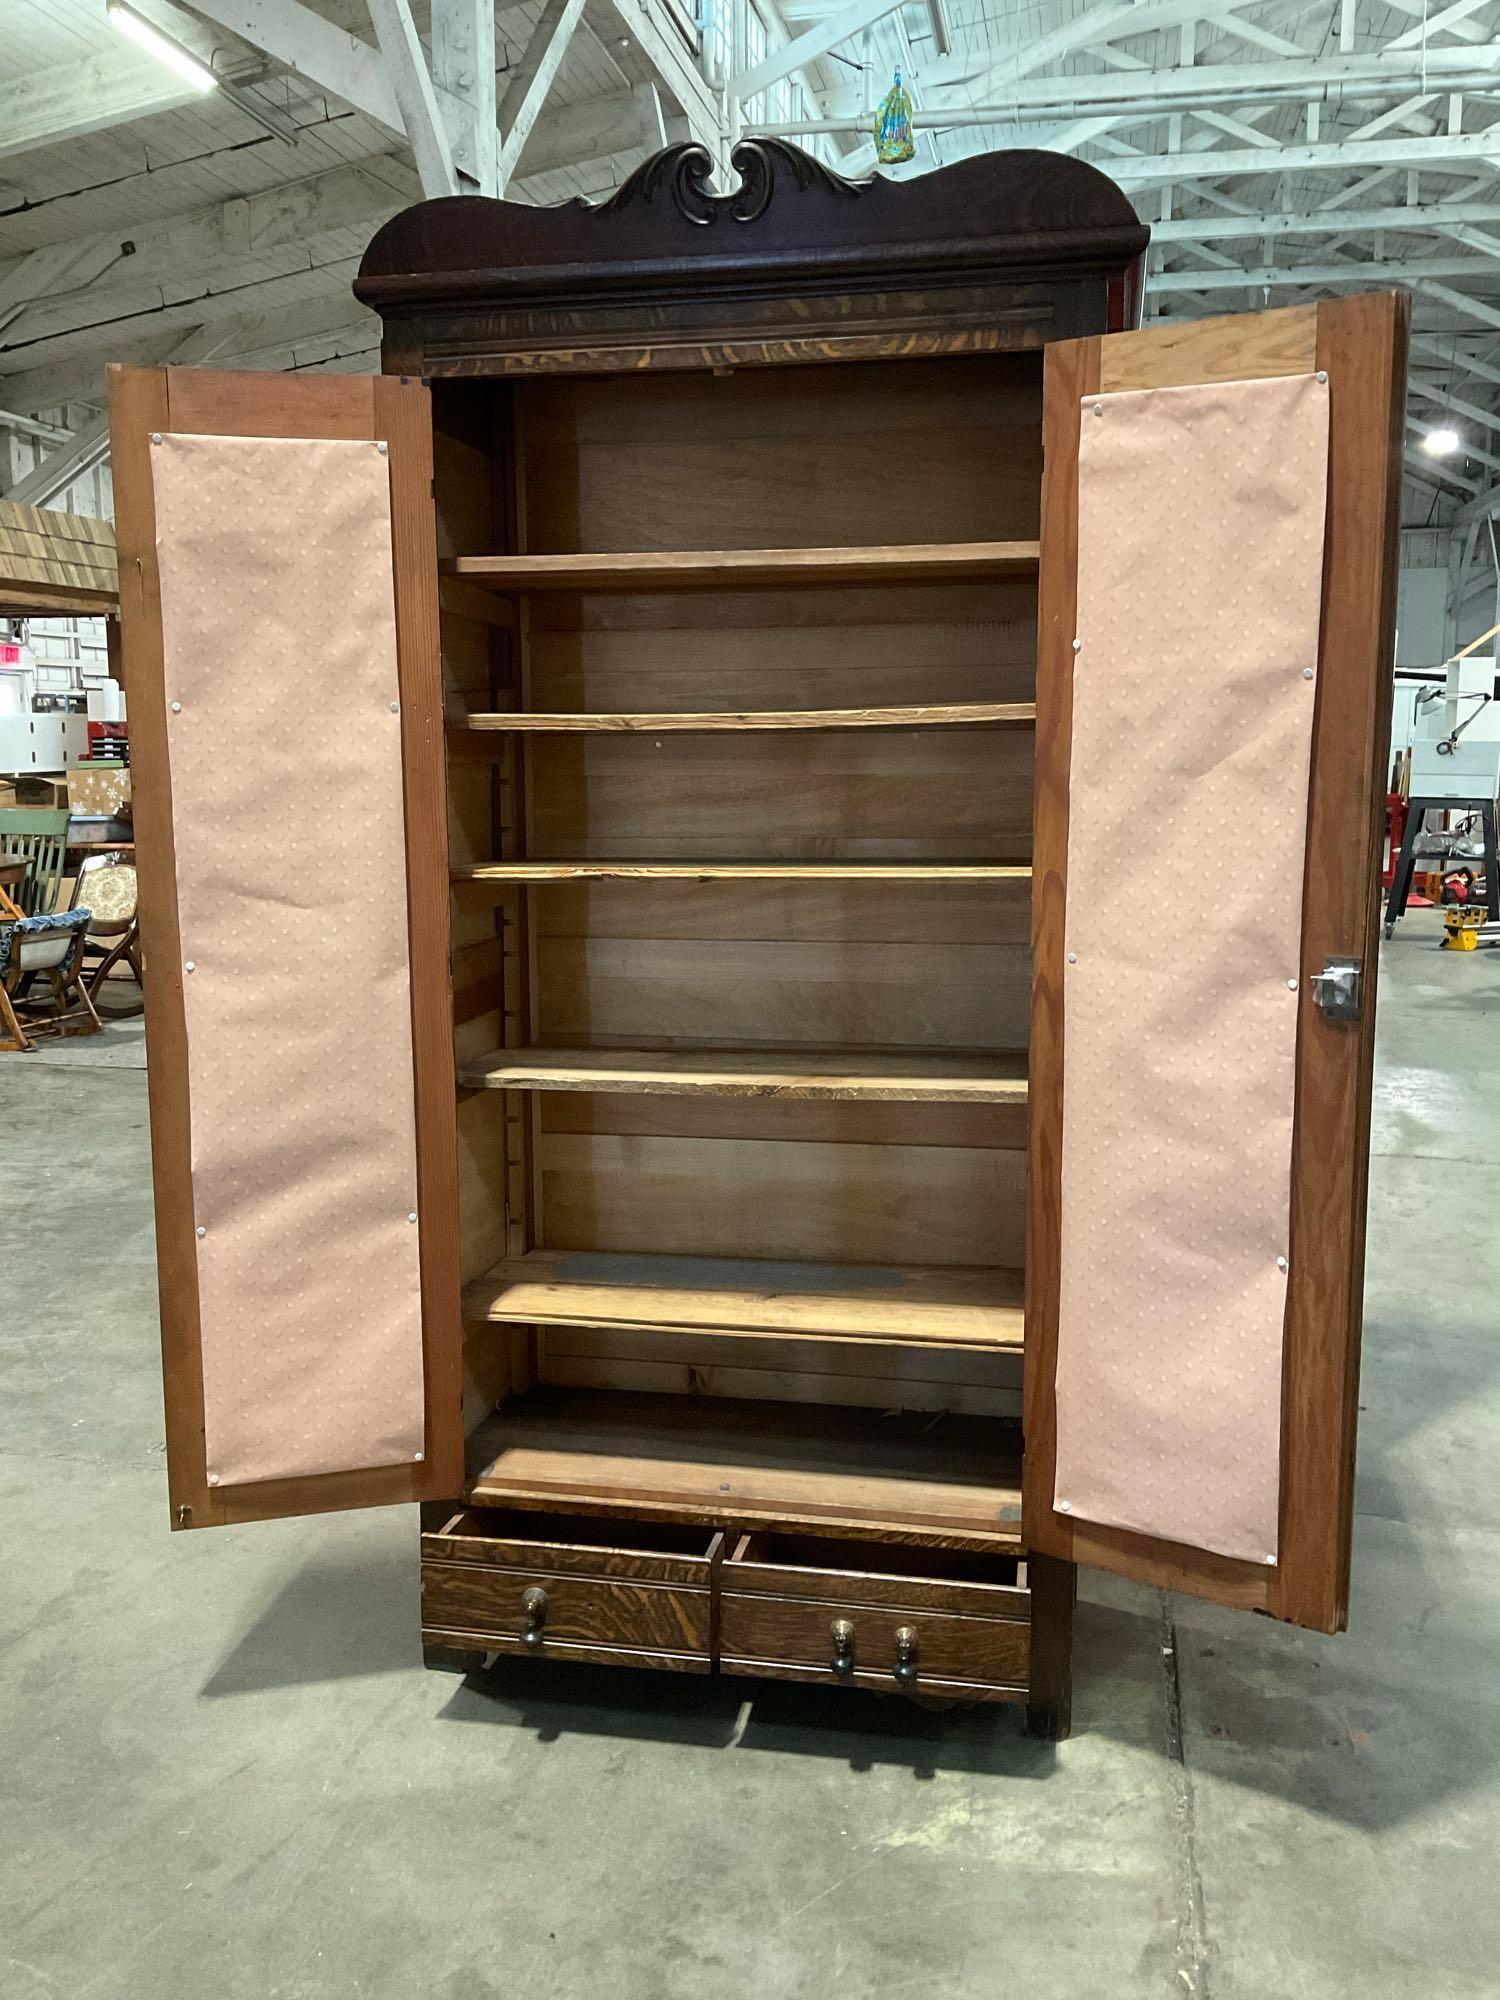 Antique Tacoma Furniture & Outfitting Co. Stained Tiger Oak Armoire w/ 5 Shelves & 2 Drawers. See